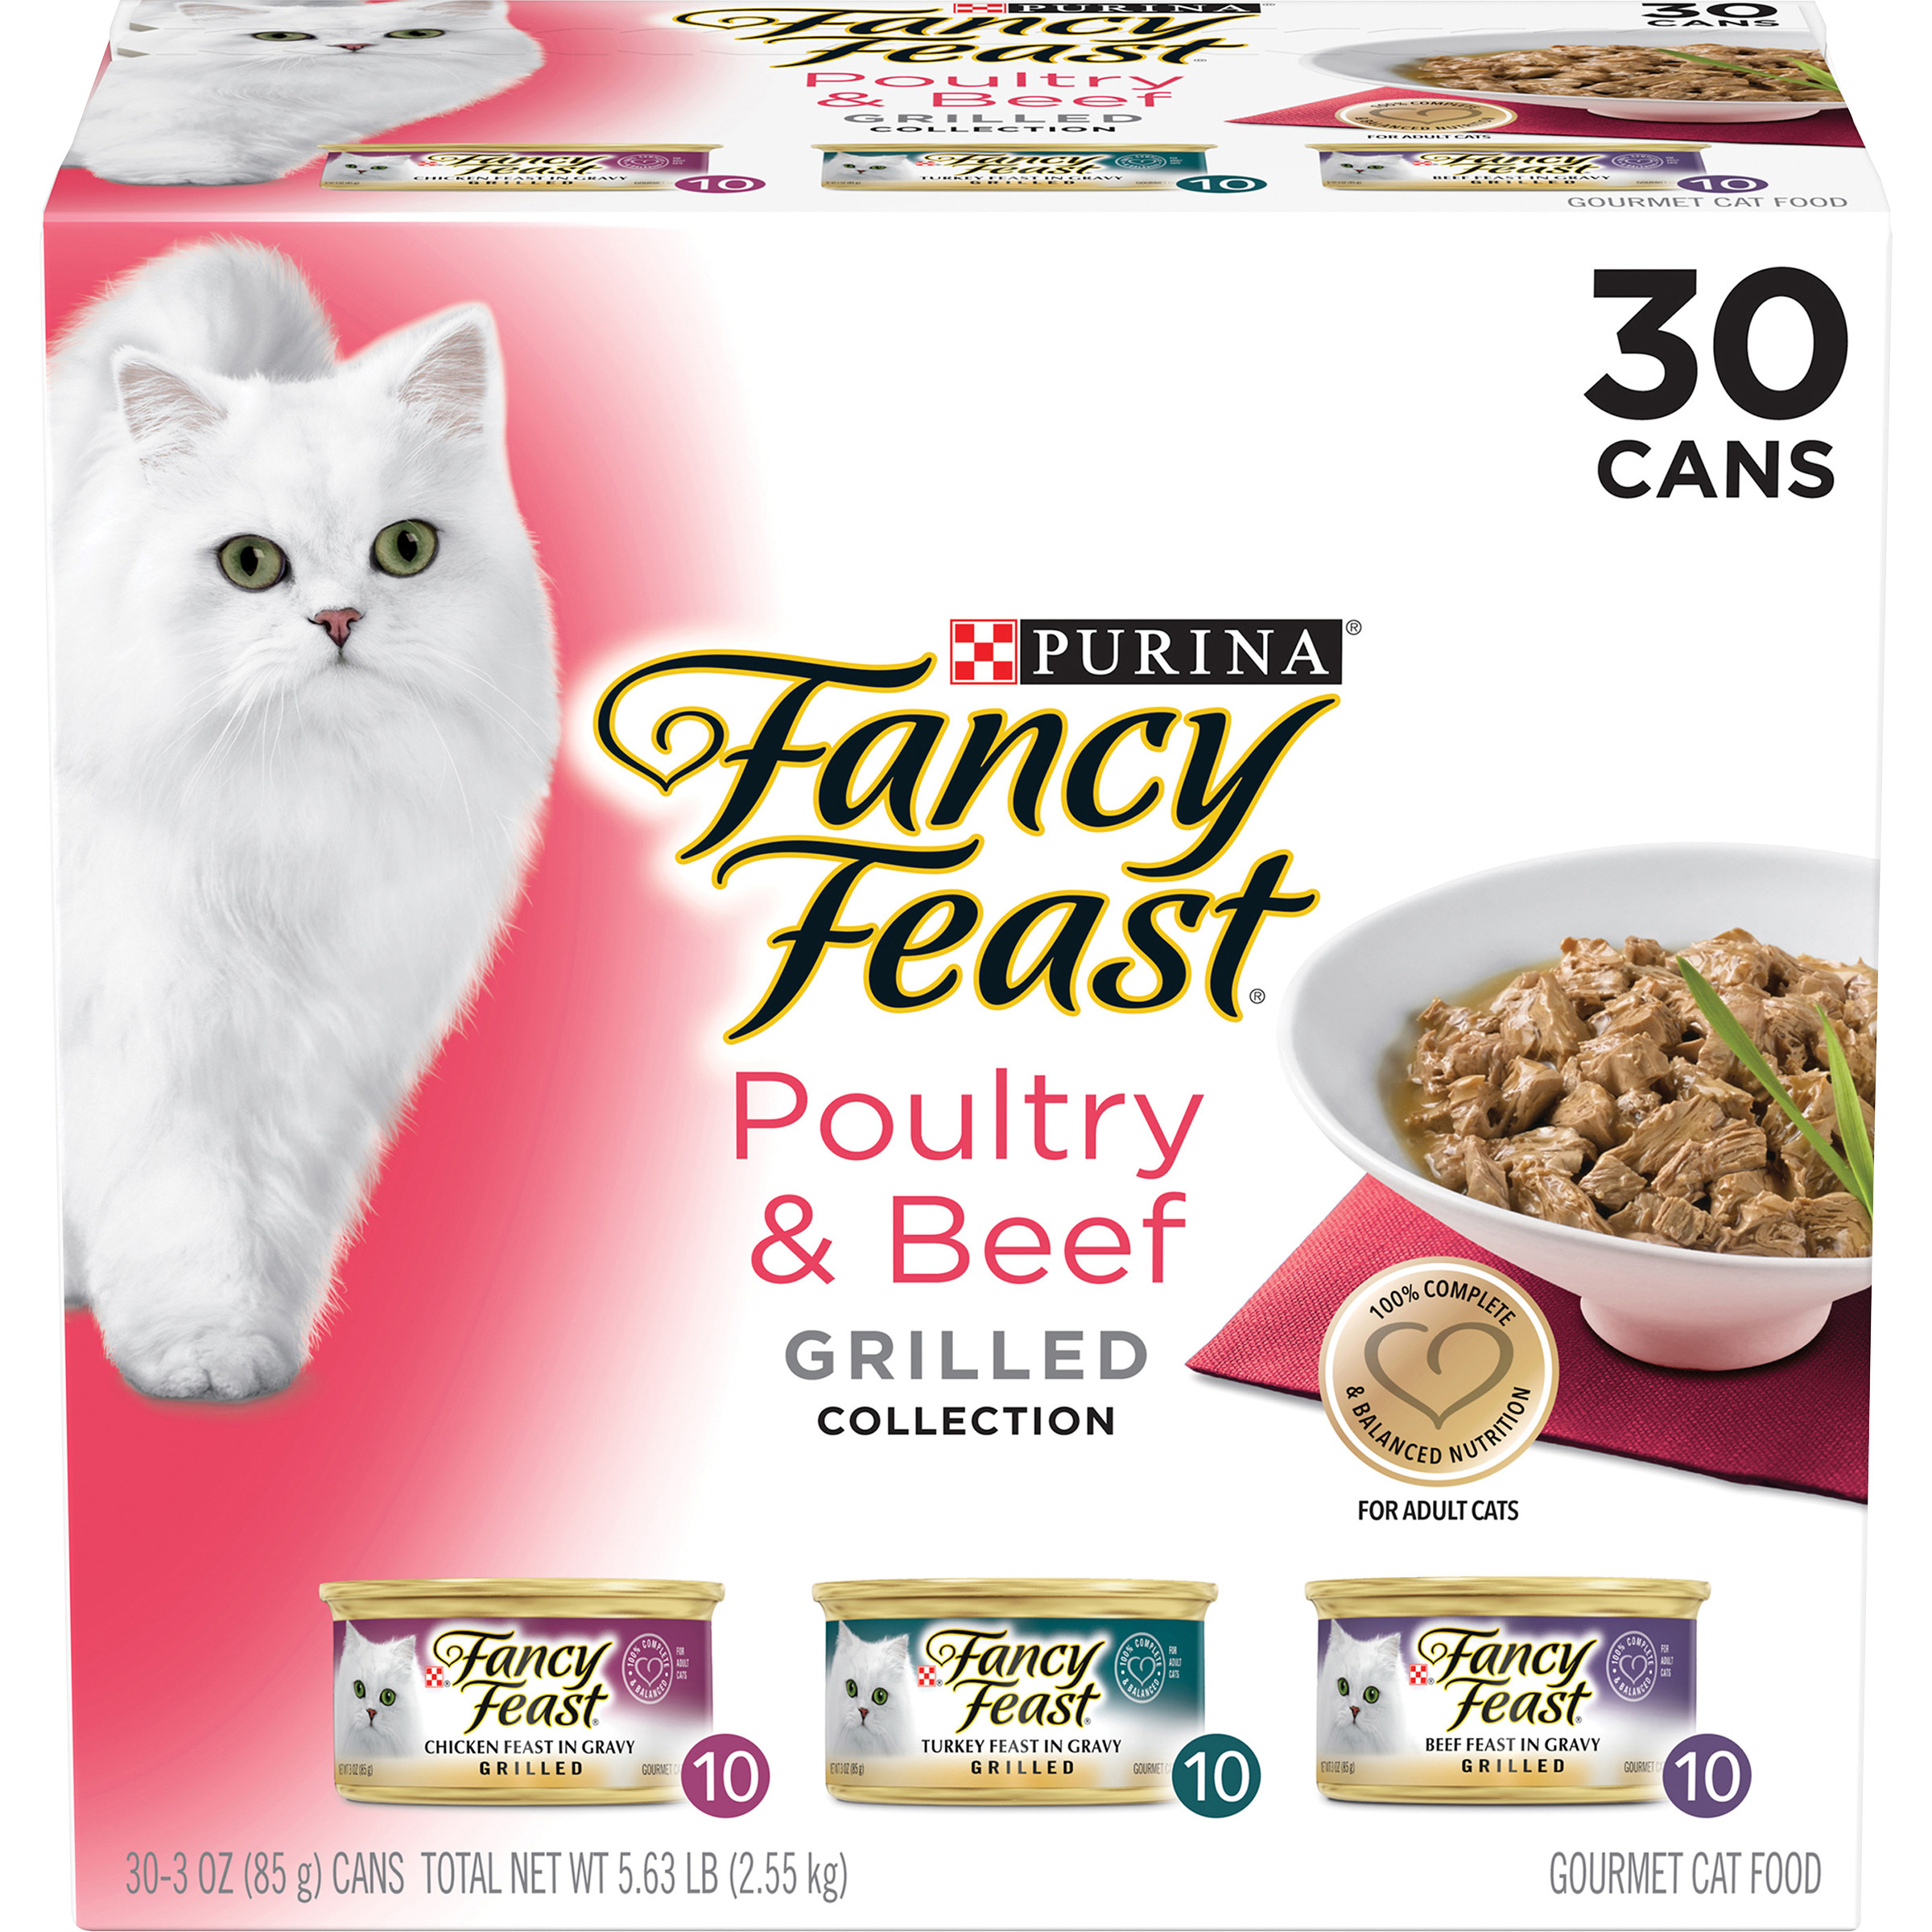 Purina Fancy Feast Wet Cat Food, Poultry & Beef Grilled Collection Variety Pack, 3 oz. Cans (30 Pack) - image 1 of 10